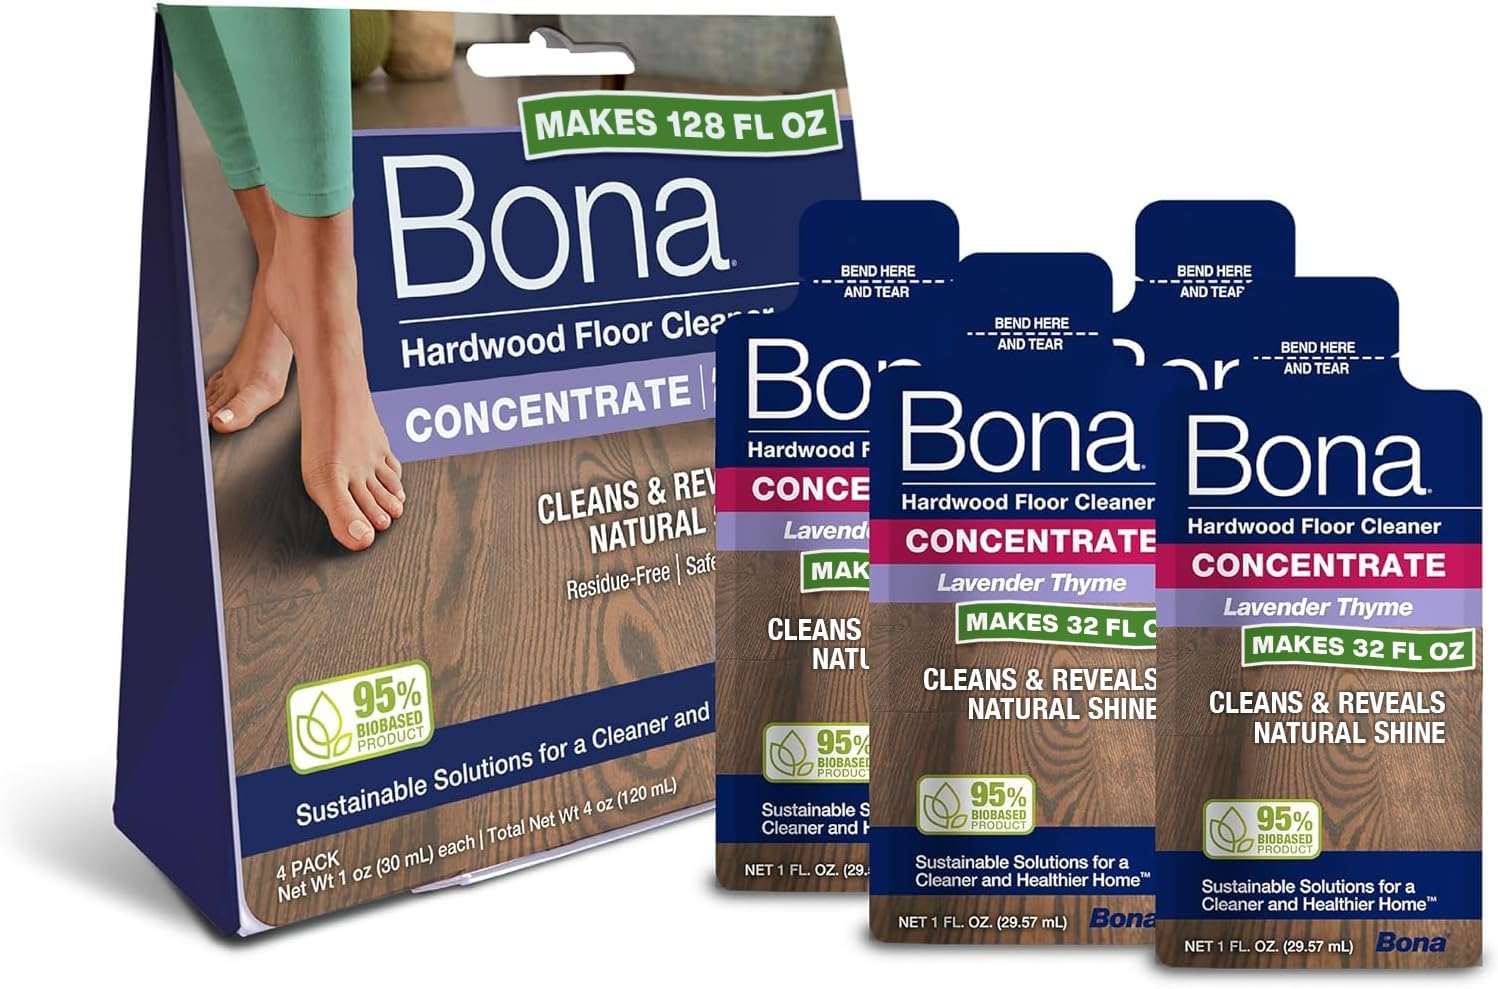 Bona Hardwood Floor Cleaner Concentrate, Lavender Thyme Scent, 1 fl oz, Pack of 4 (Makes 128 fl oz) - Residue-Free Floor Cleaning Concentrate Spray Mop and Spray Bottle Refill - For Wood Floors